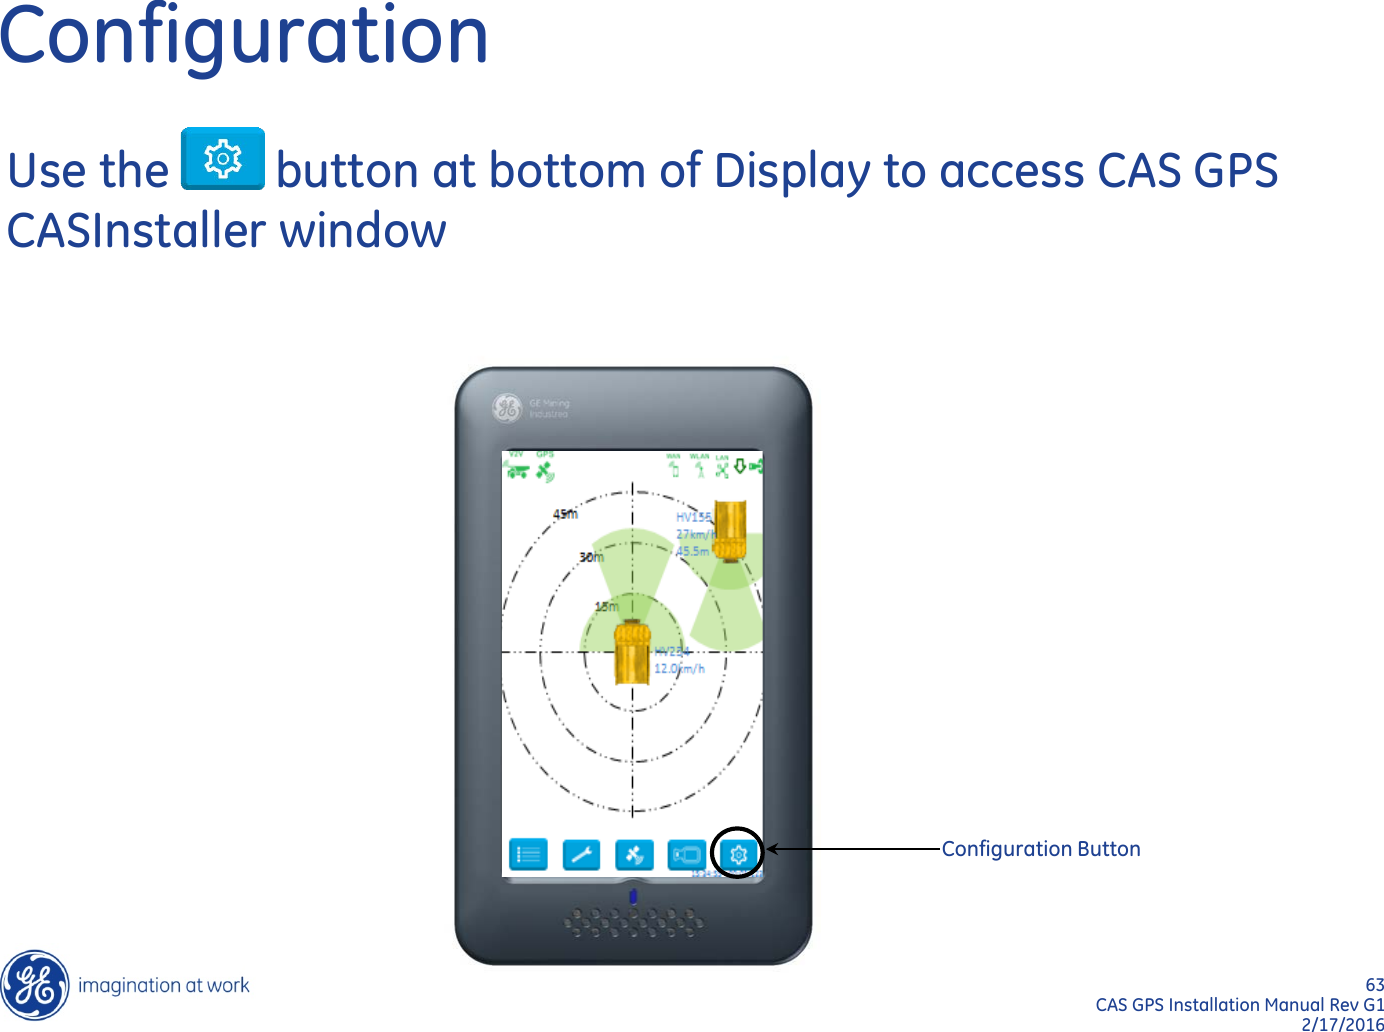 63  CAS GPS Installation Manual Rev G1 2/17/2016 Configuration Configuration Button Use the         button at bottom of Display to access CAS GPS CASInstaller window 